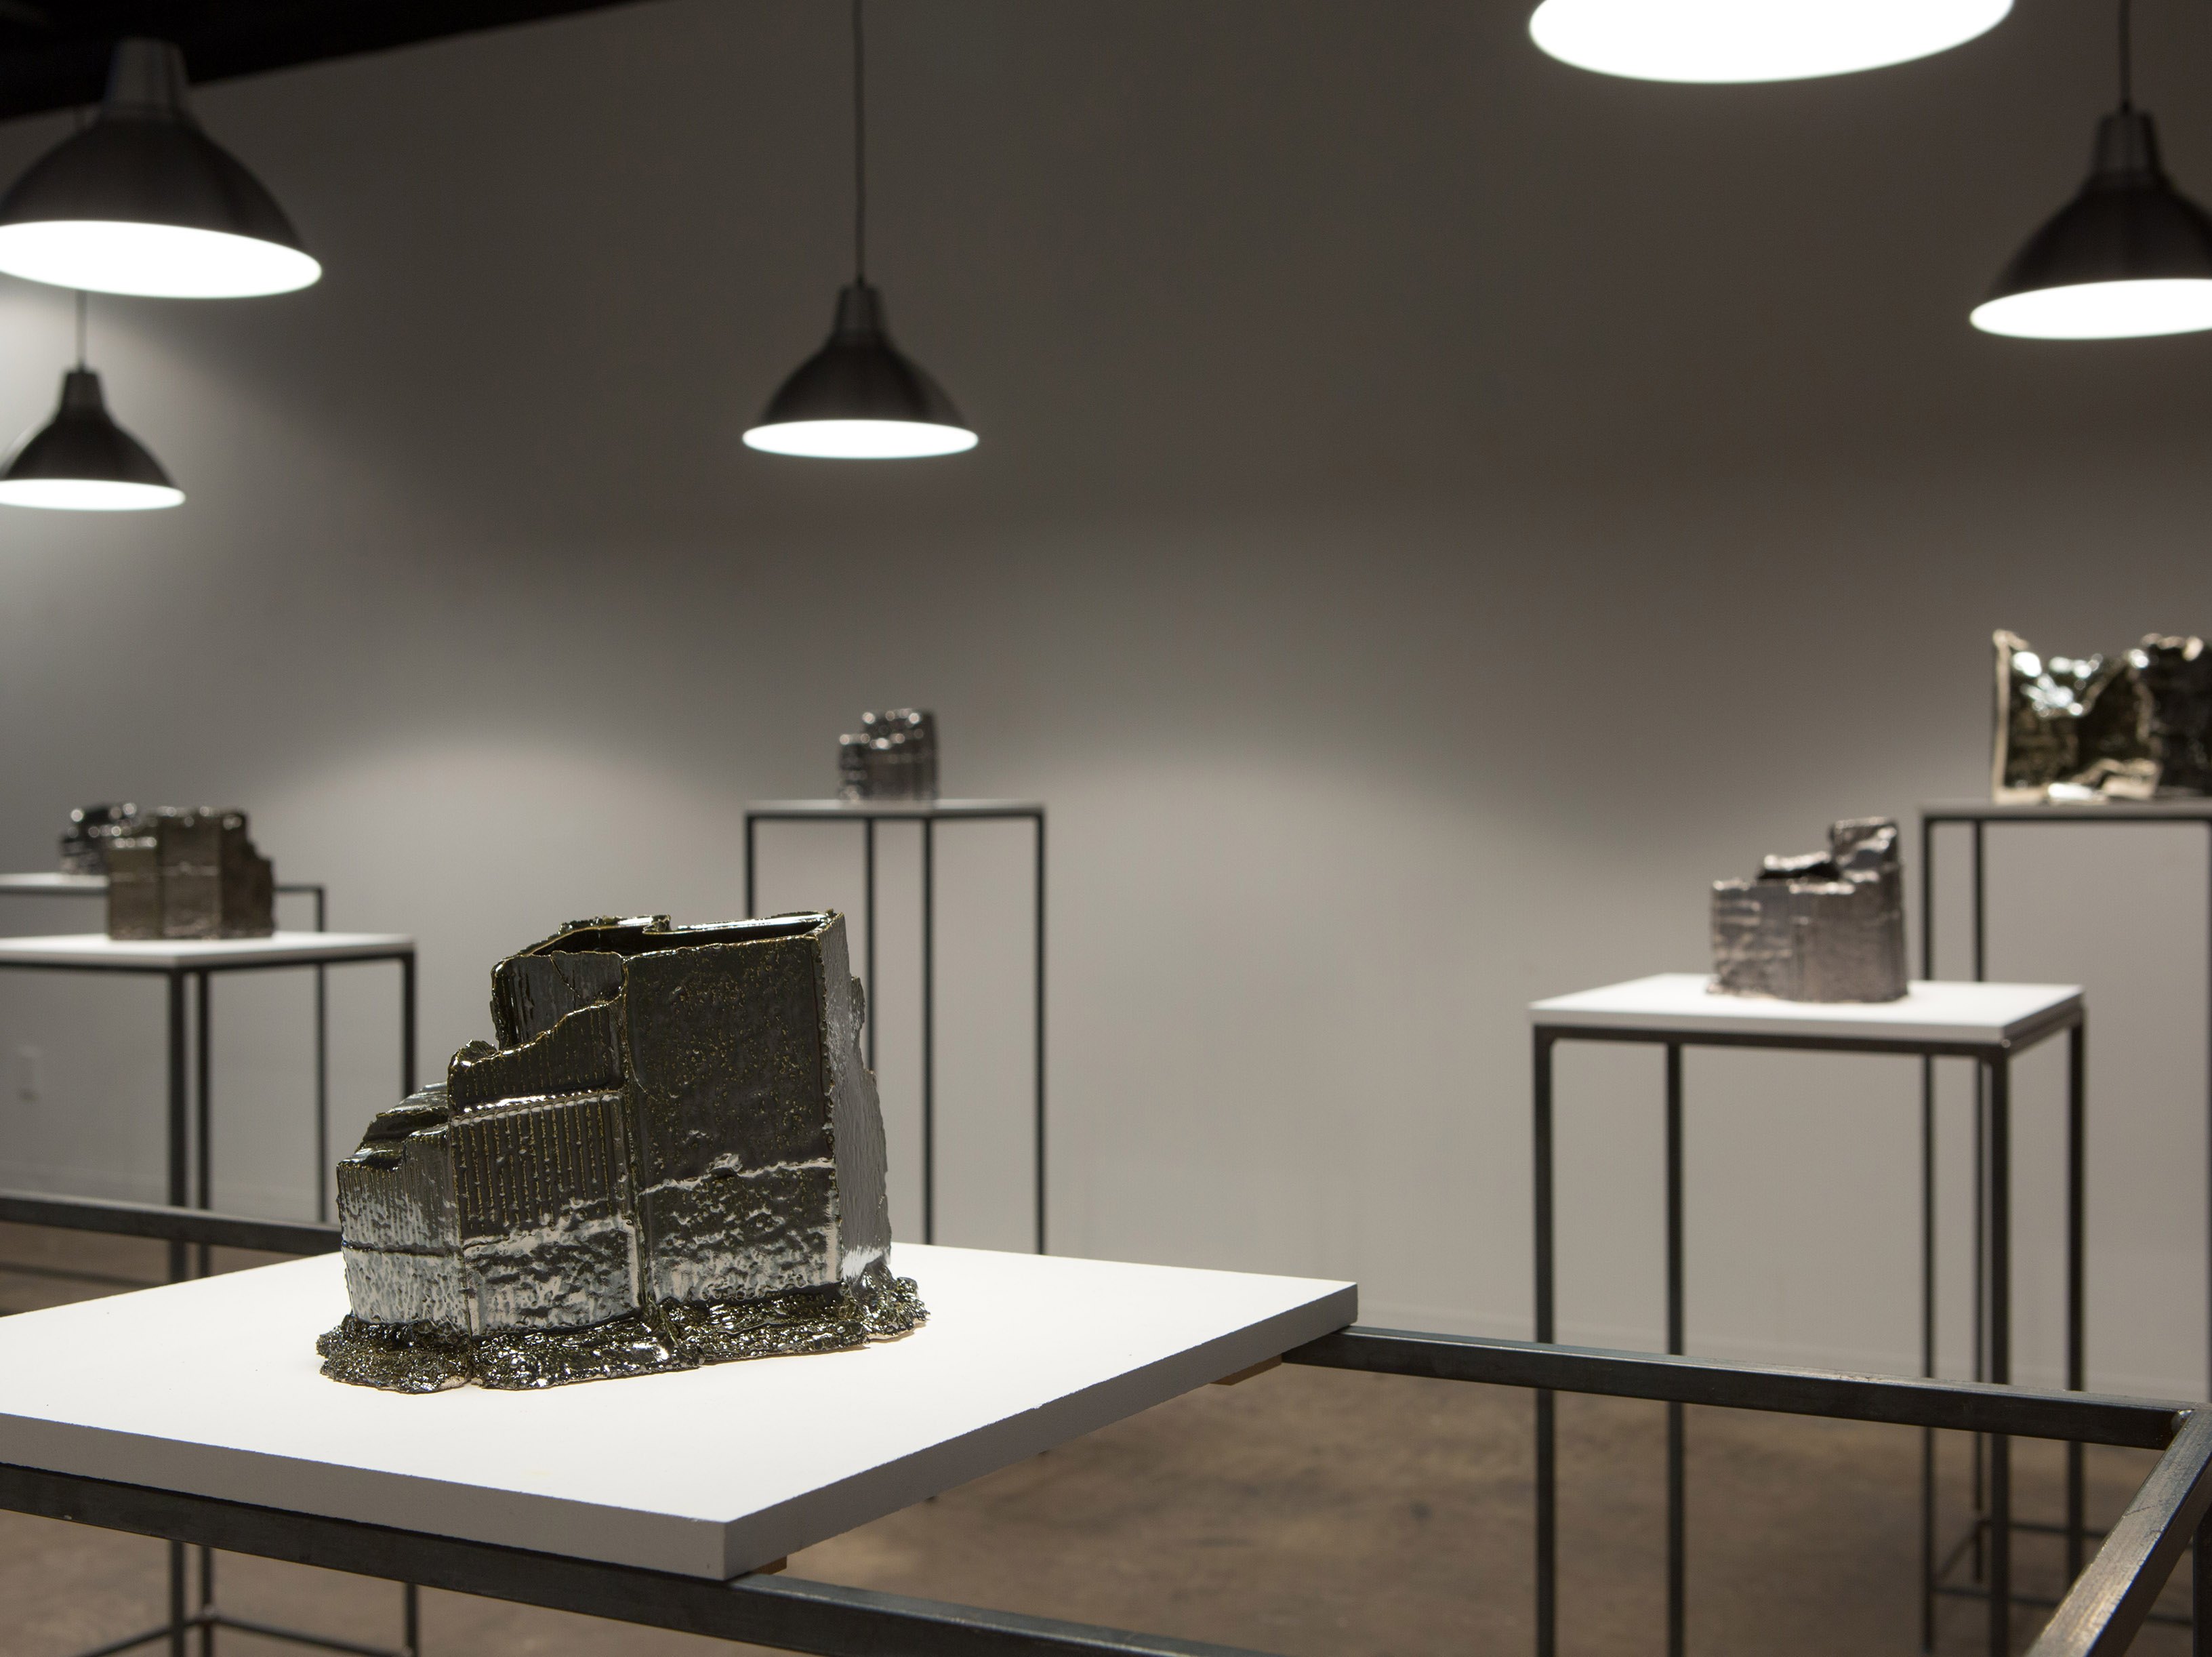 A room full of metallic-coated ceramic forms on plinths. Above each plinth is a low-hanging light fixture. 